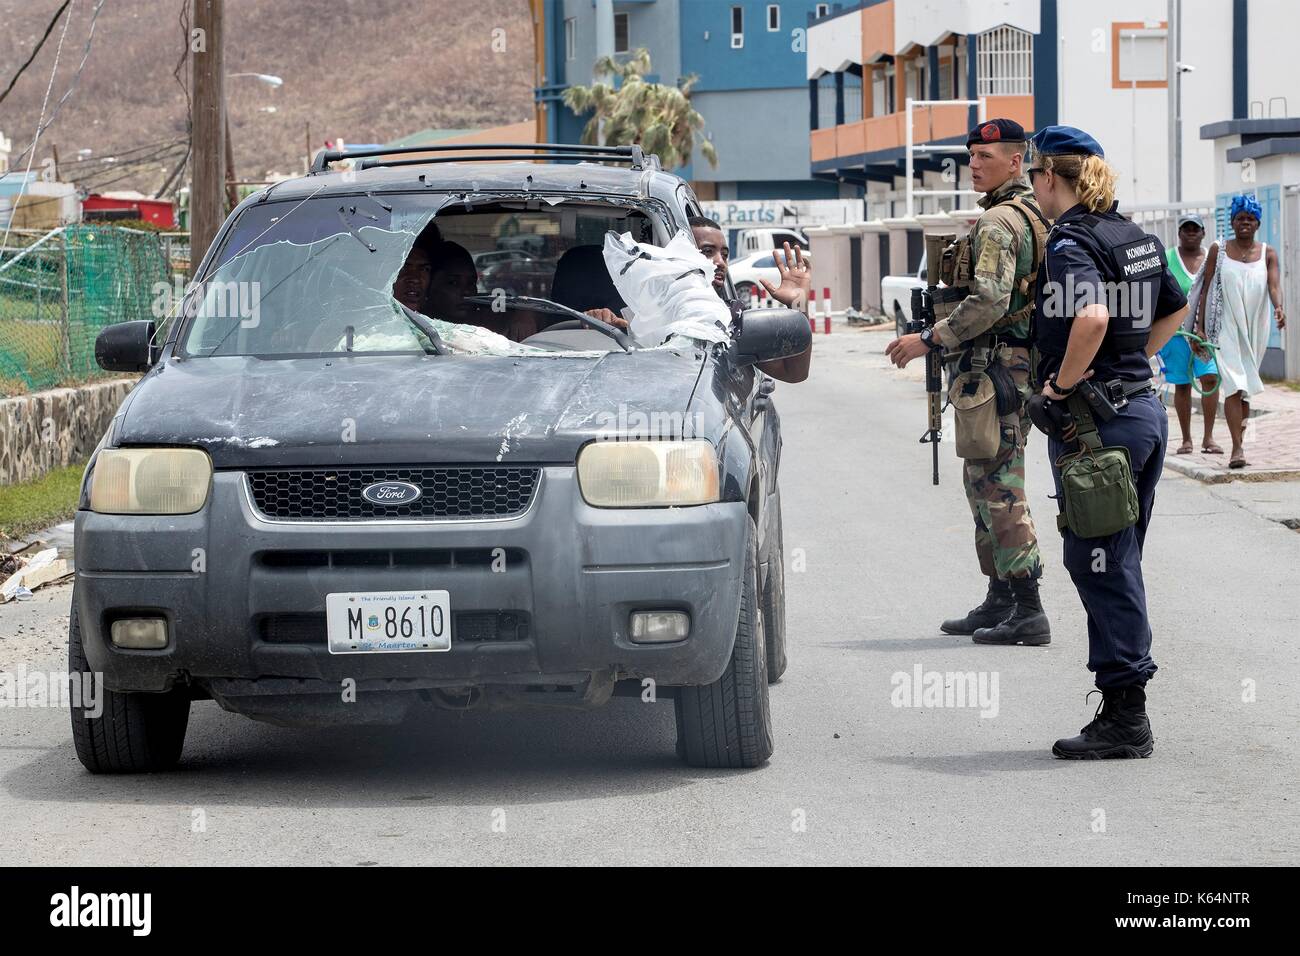 Dutch Marines and police check vehicles to prevent looting and assist residents in the aftermath of Hurricane Irma that devastated much of the island September 8, 2017 in Philipsburg, St. Maarten. Stock Photo